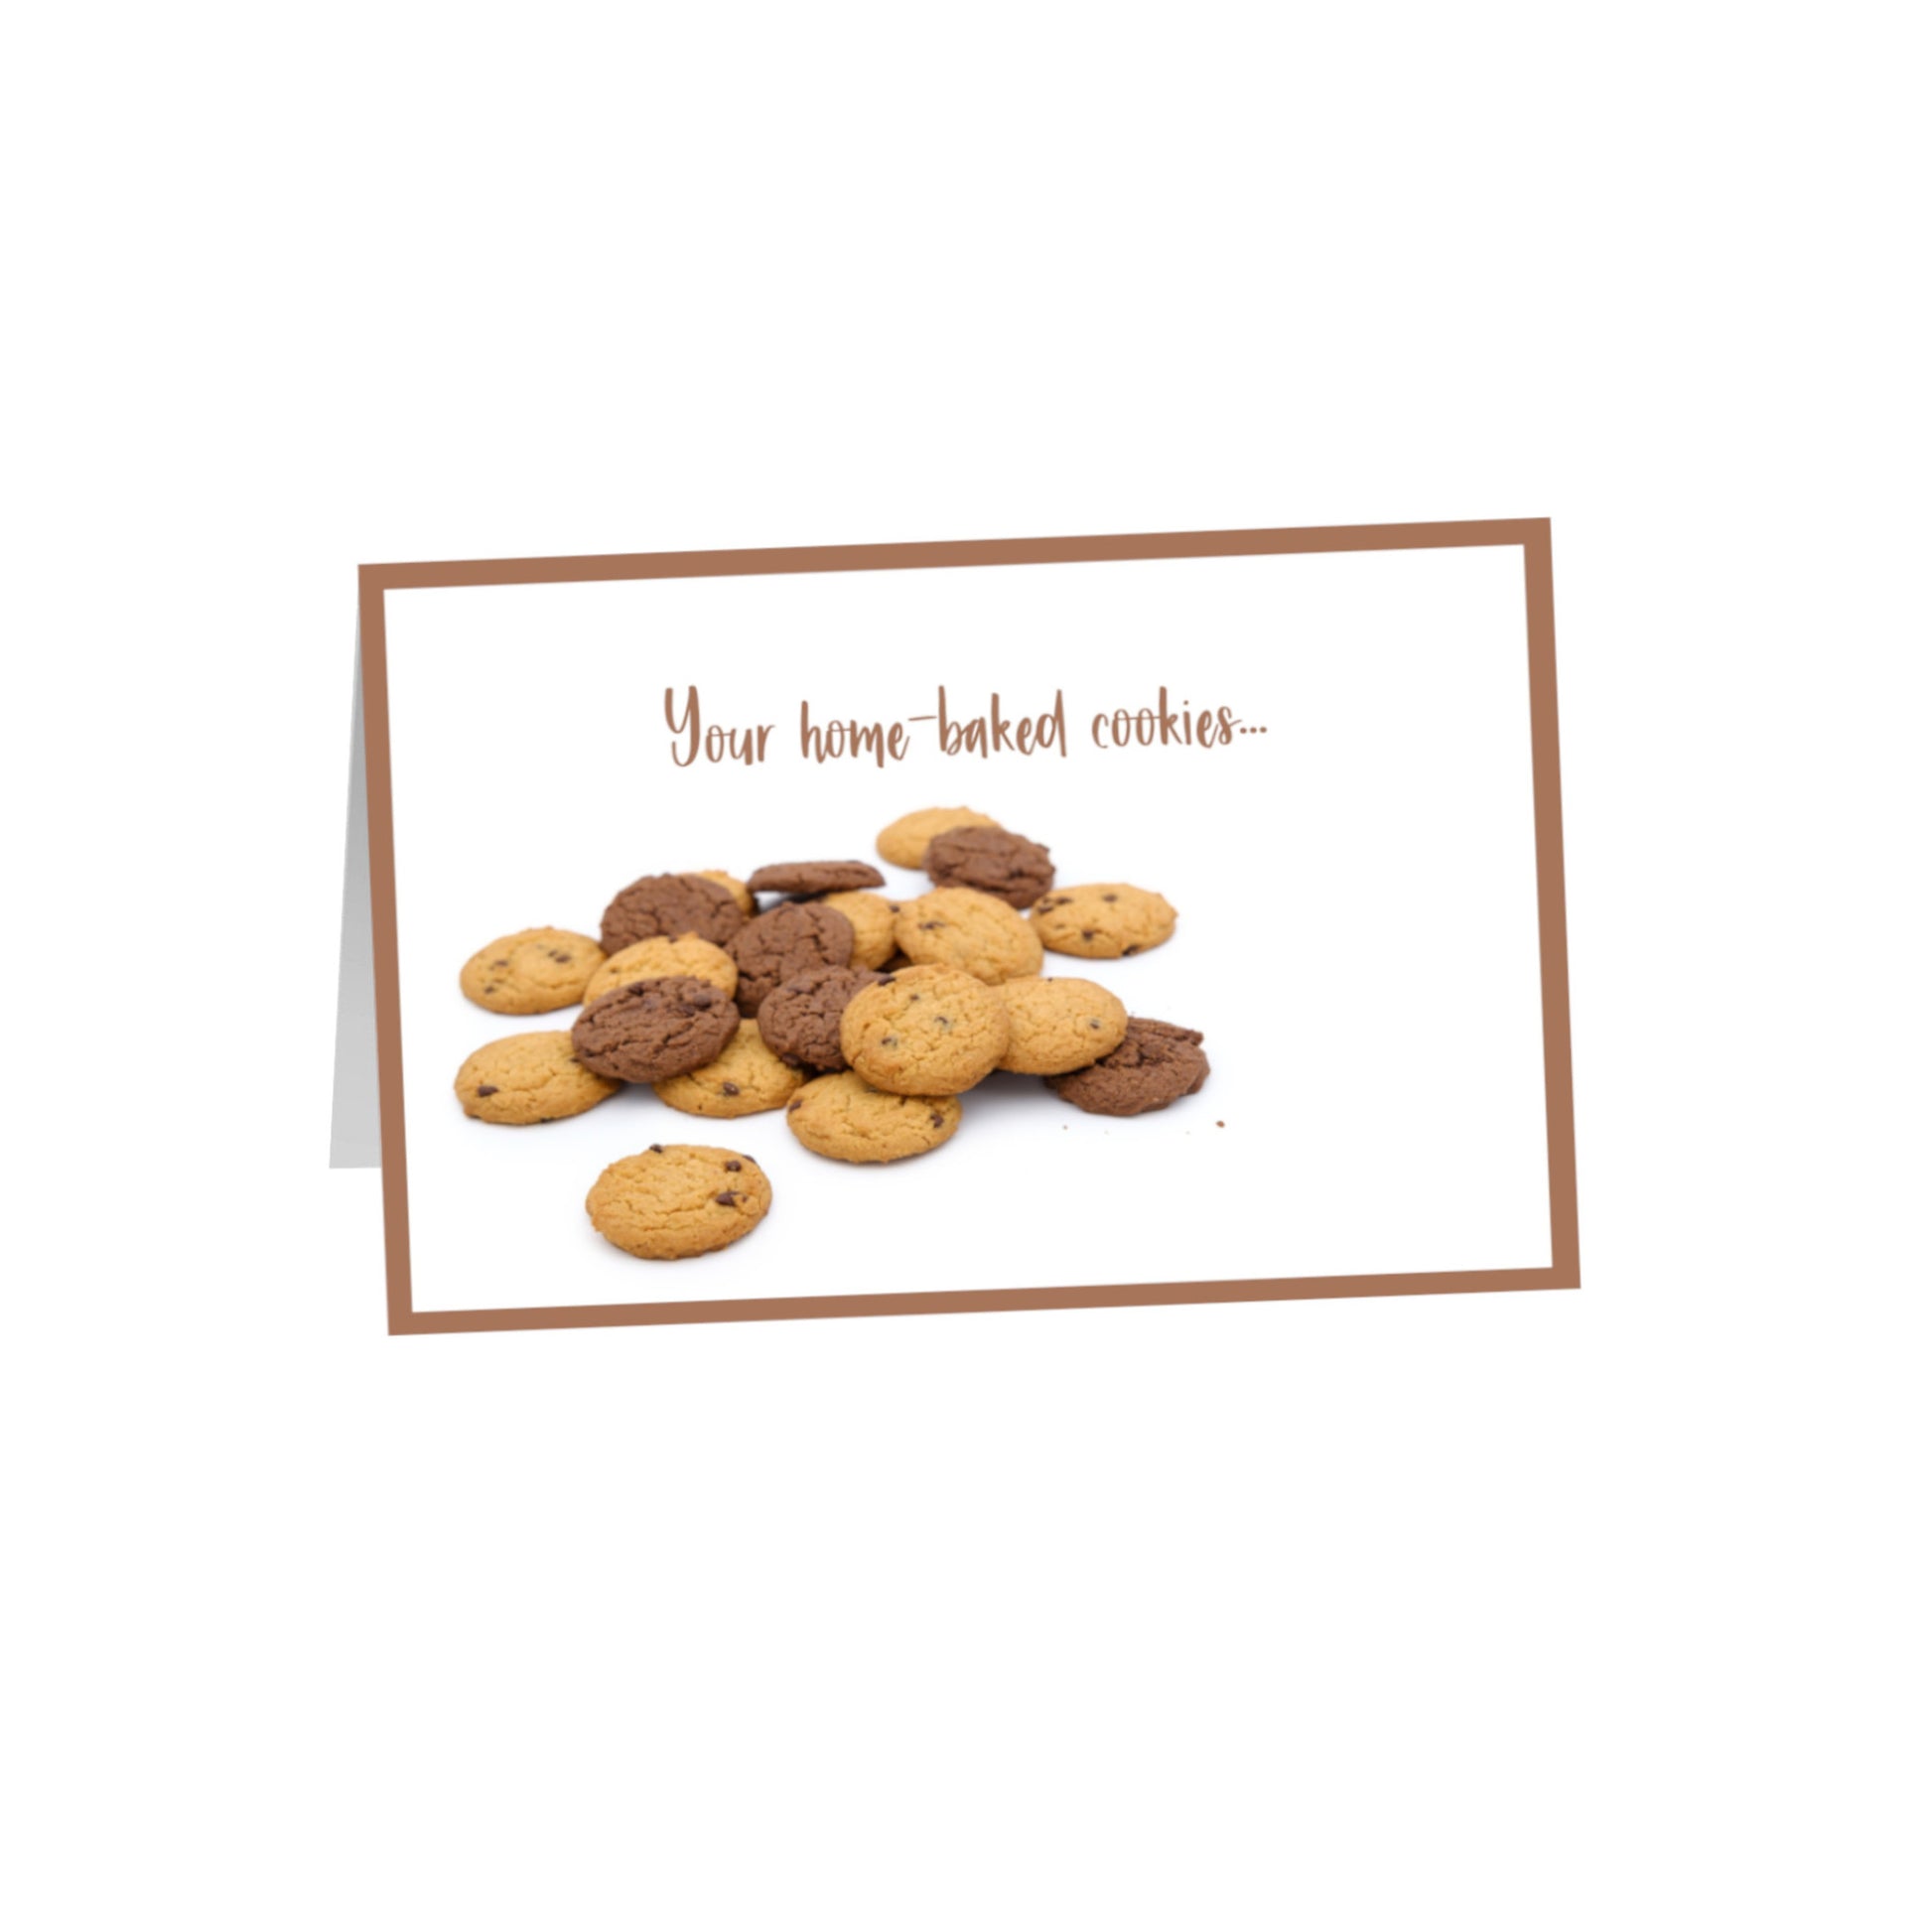 Your home-baked cookies 8.5x5.5 Landscape Greeting Card 